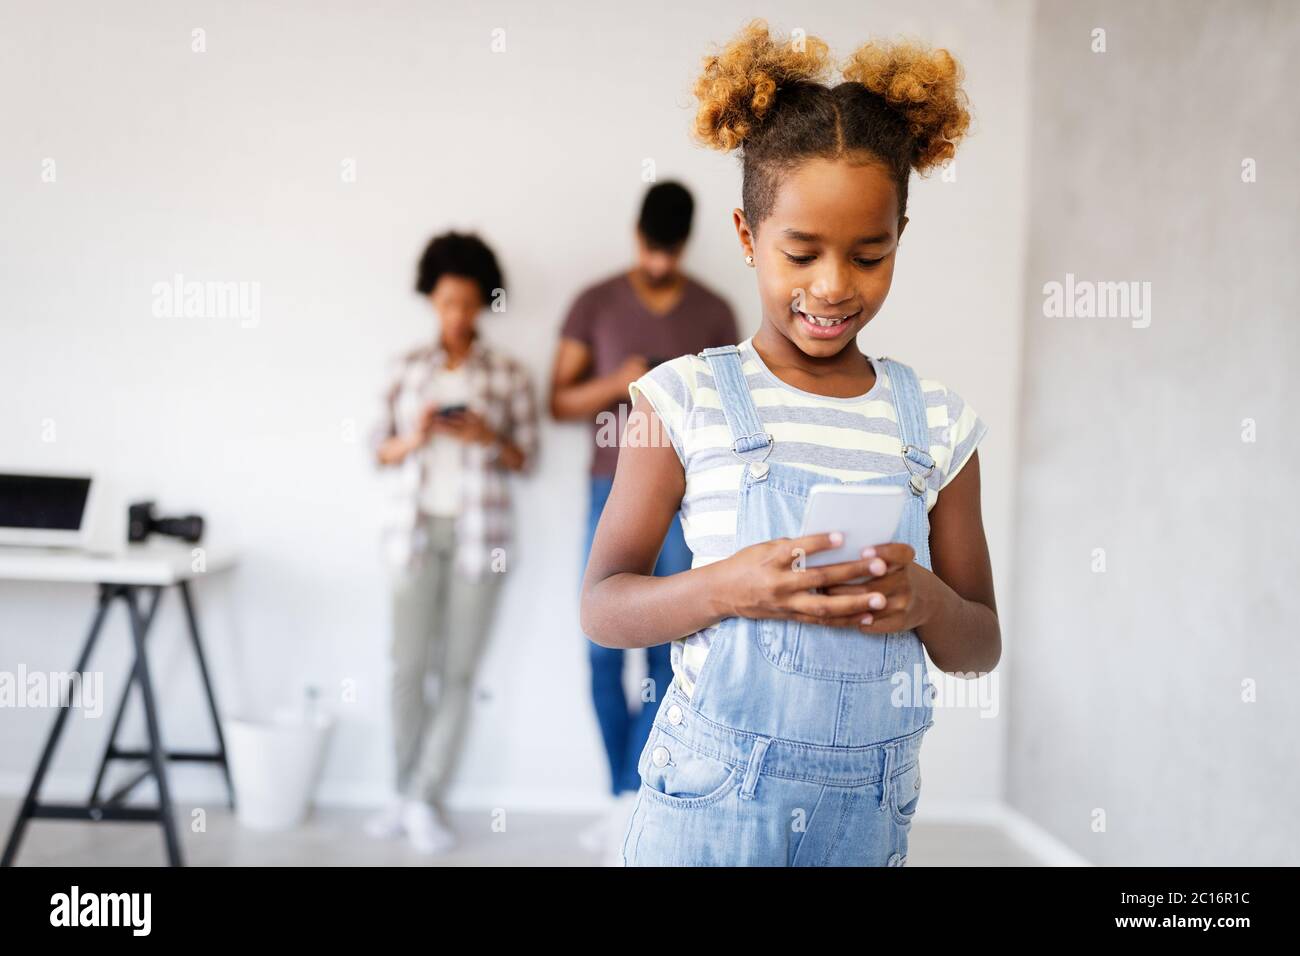 Children, technology and communication concept. Smiling girl using smartphone Stock Photo